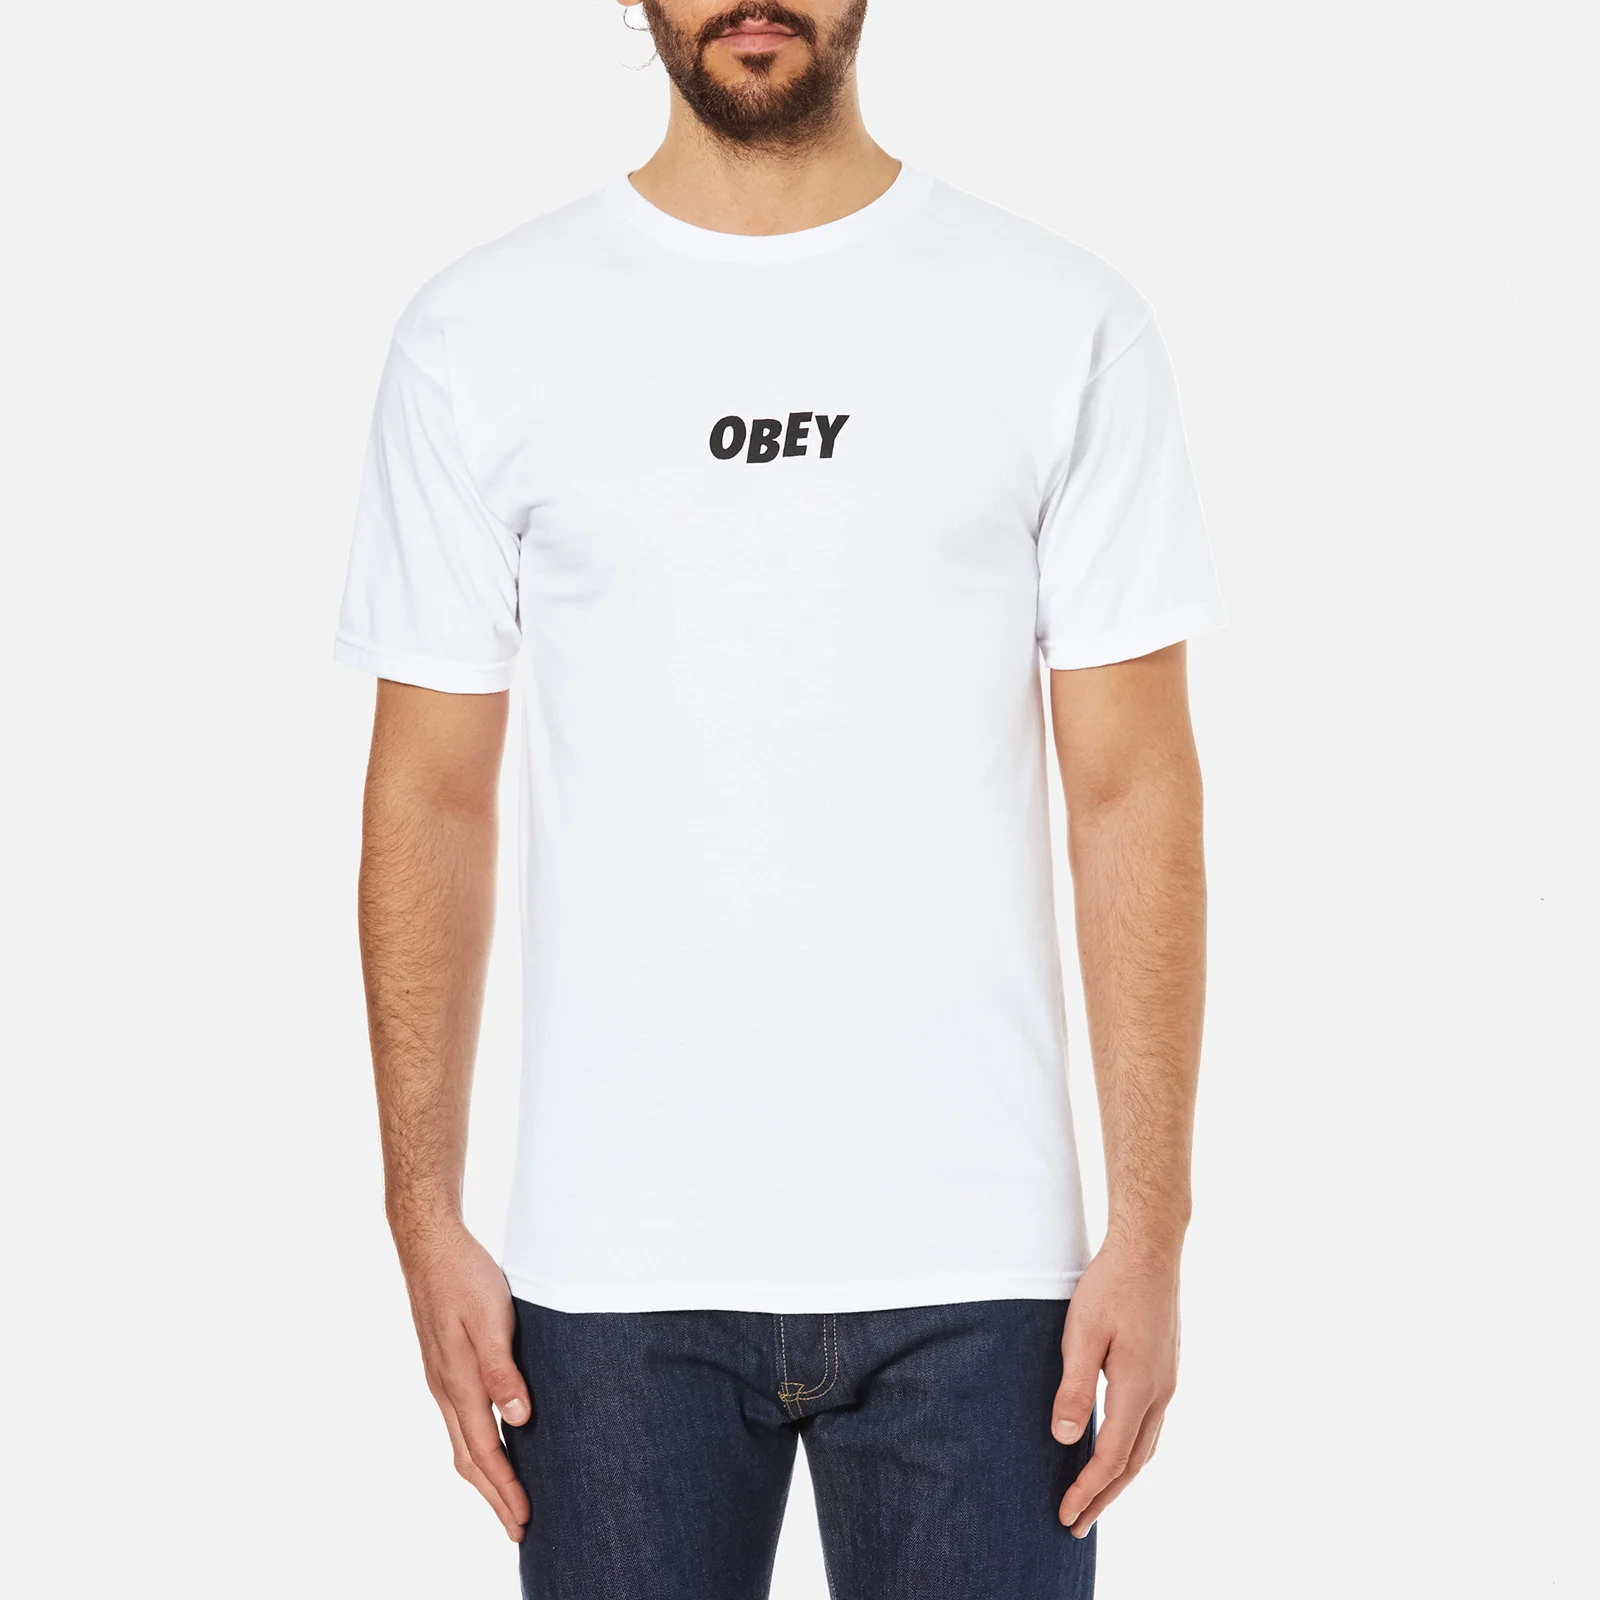 OBEY Clothing Men's OBEY Clothing Jumbled T-Shirt - White Image 1